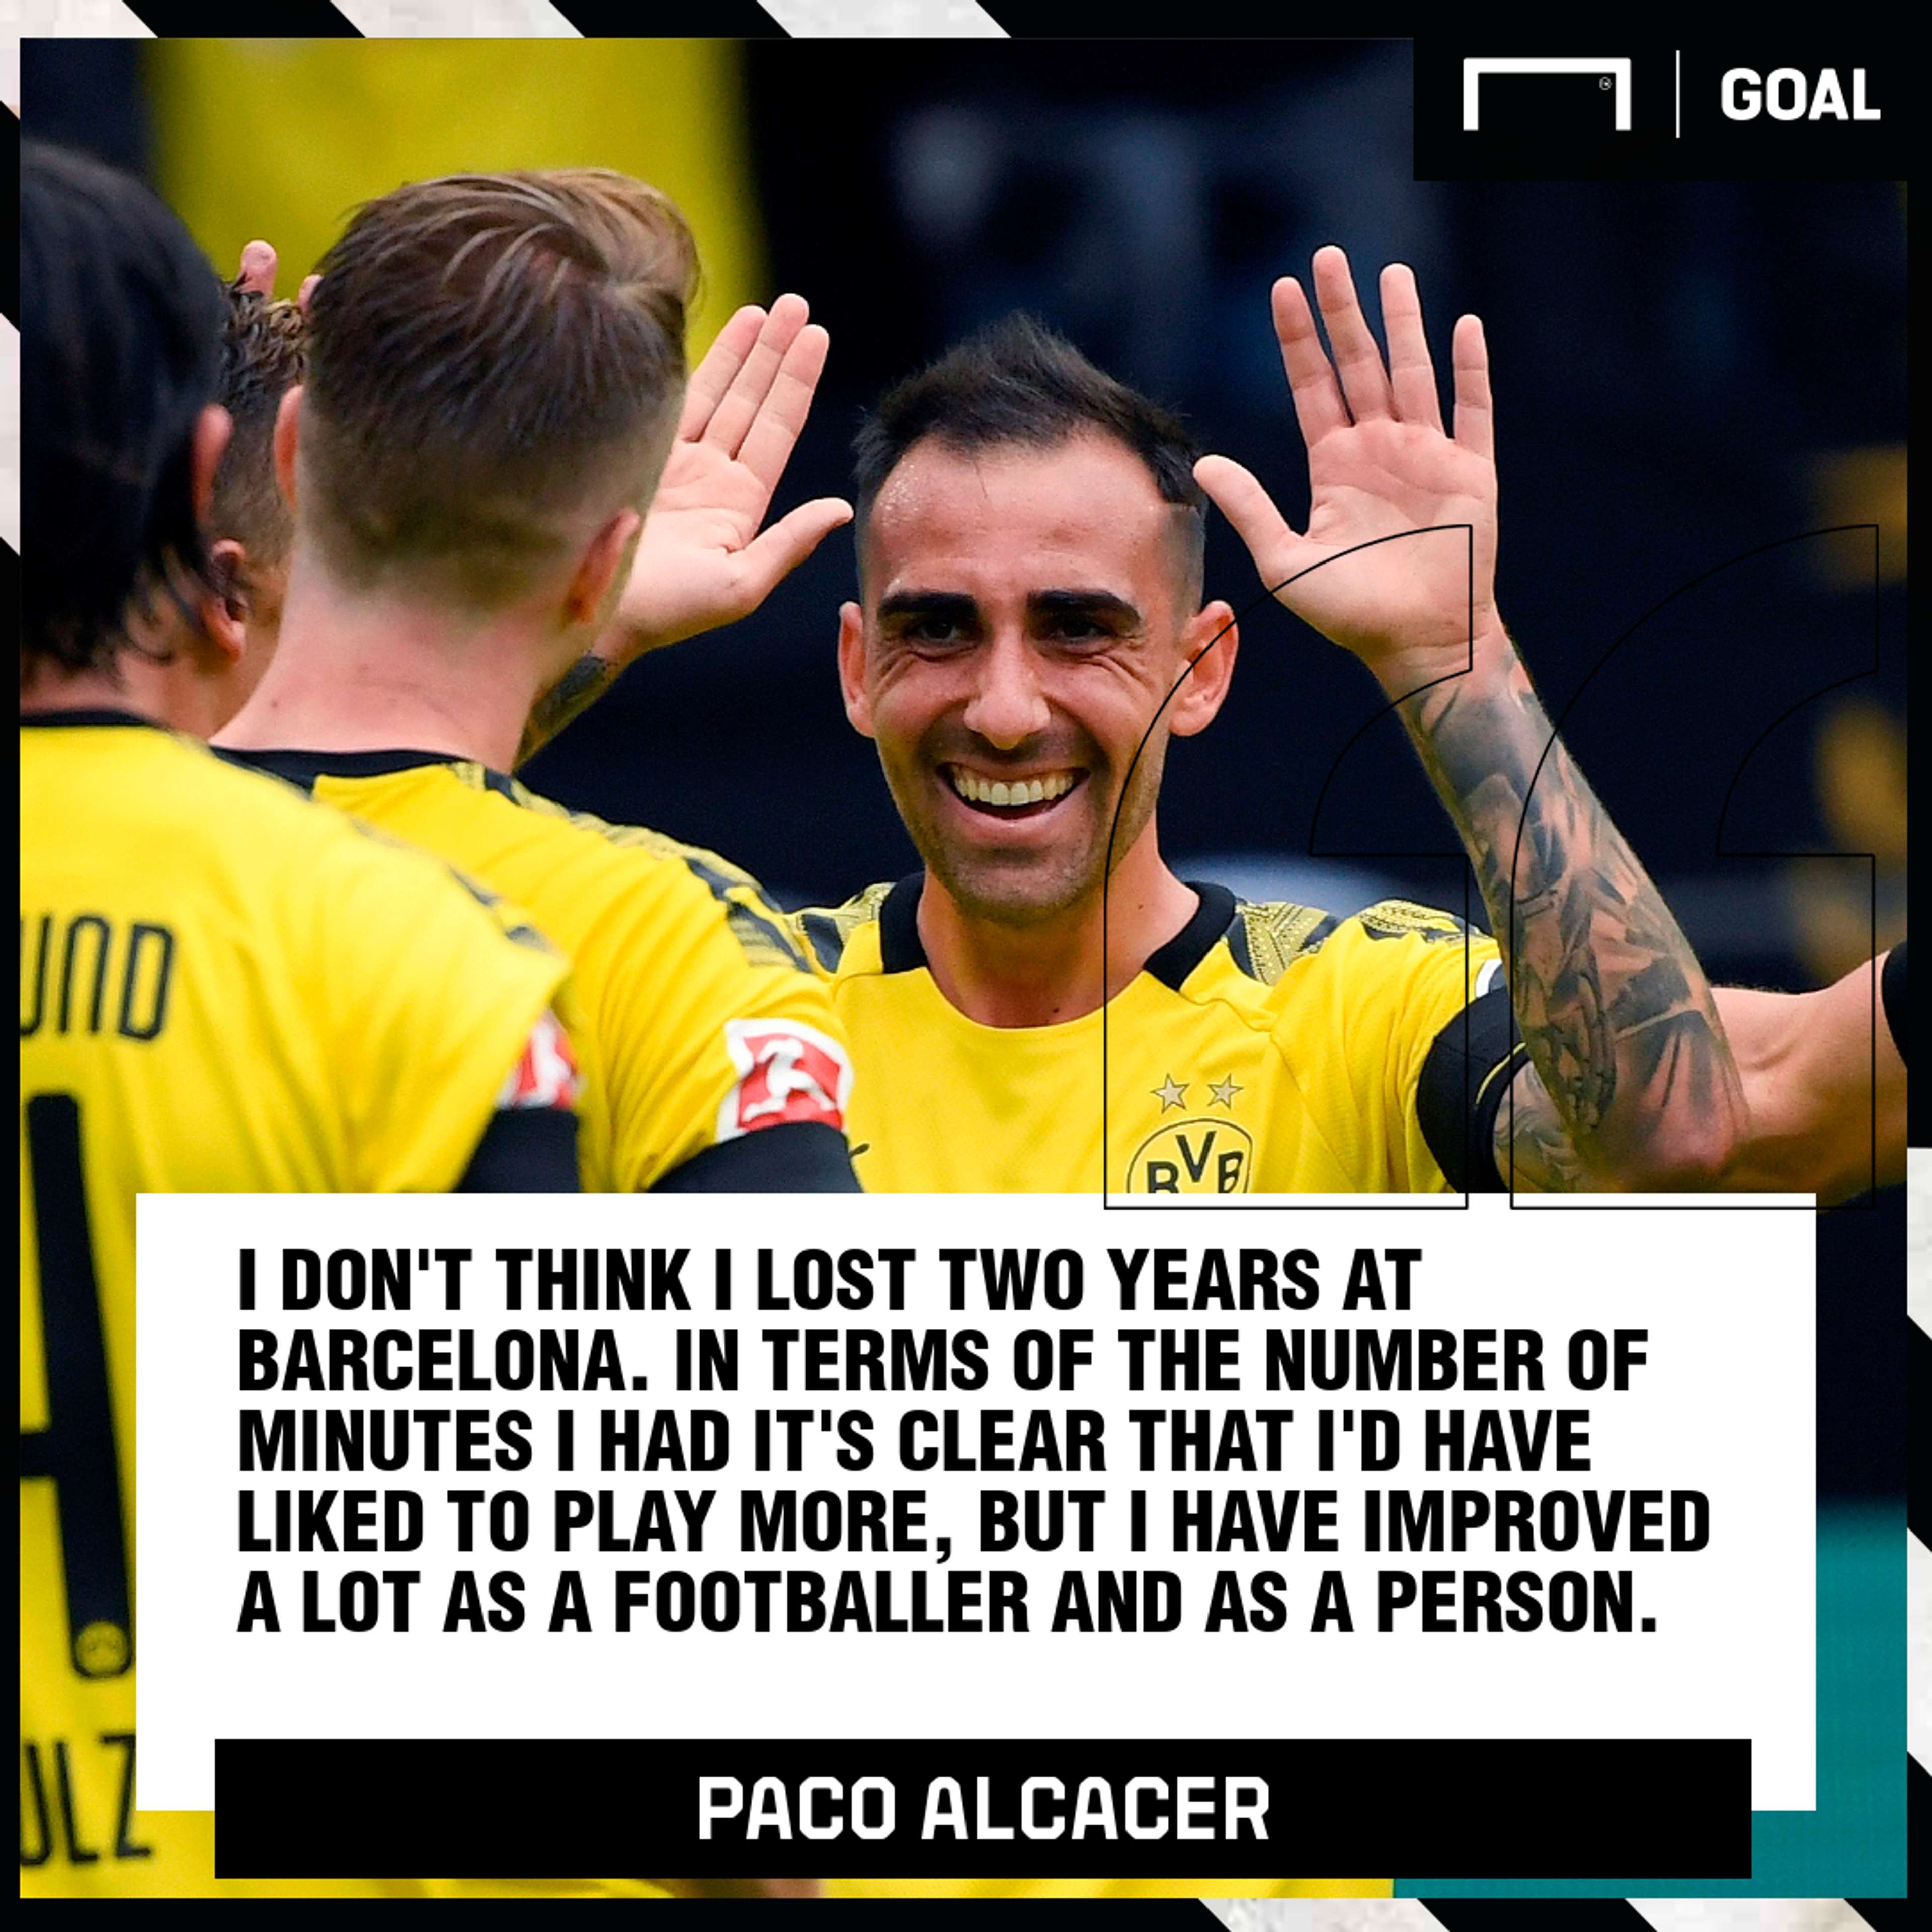 Paco Alcacer quote PS